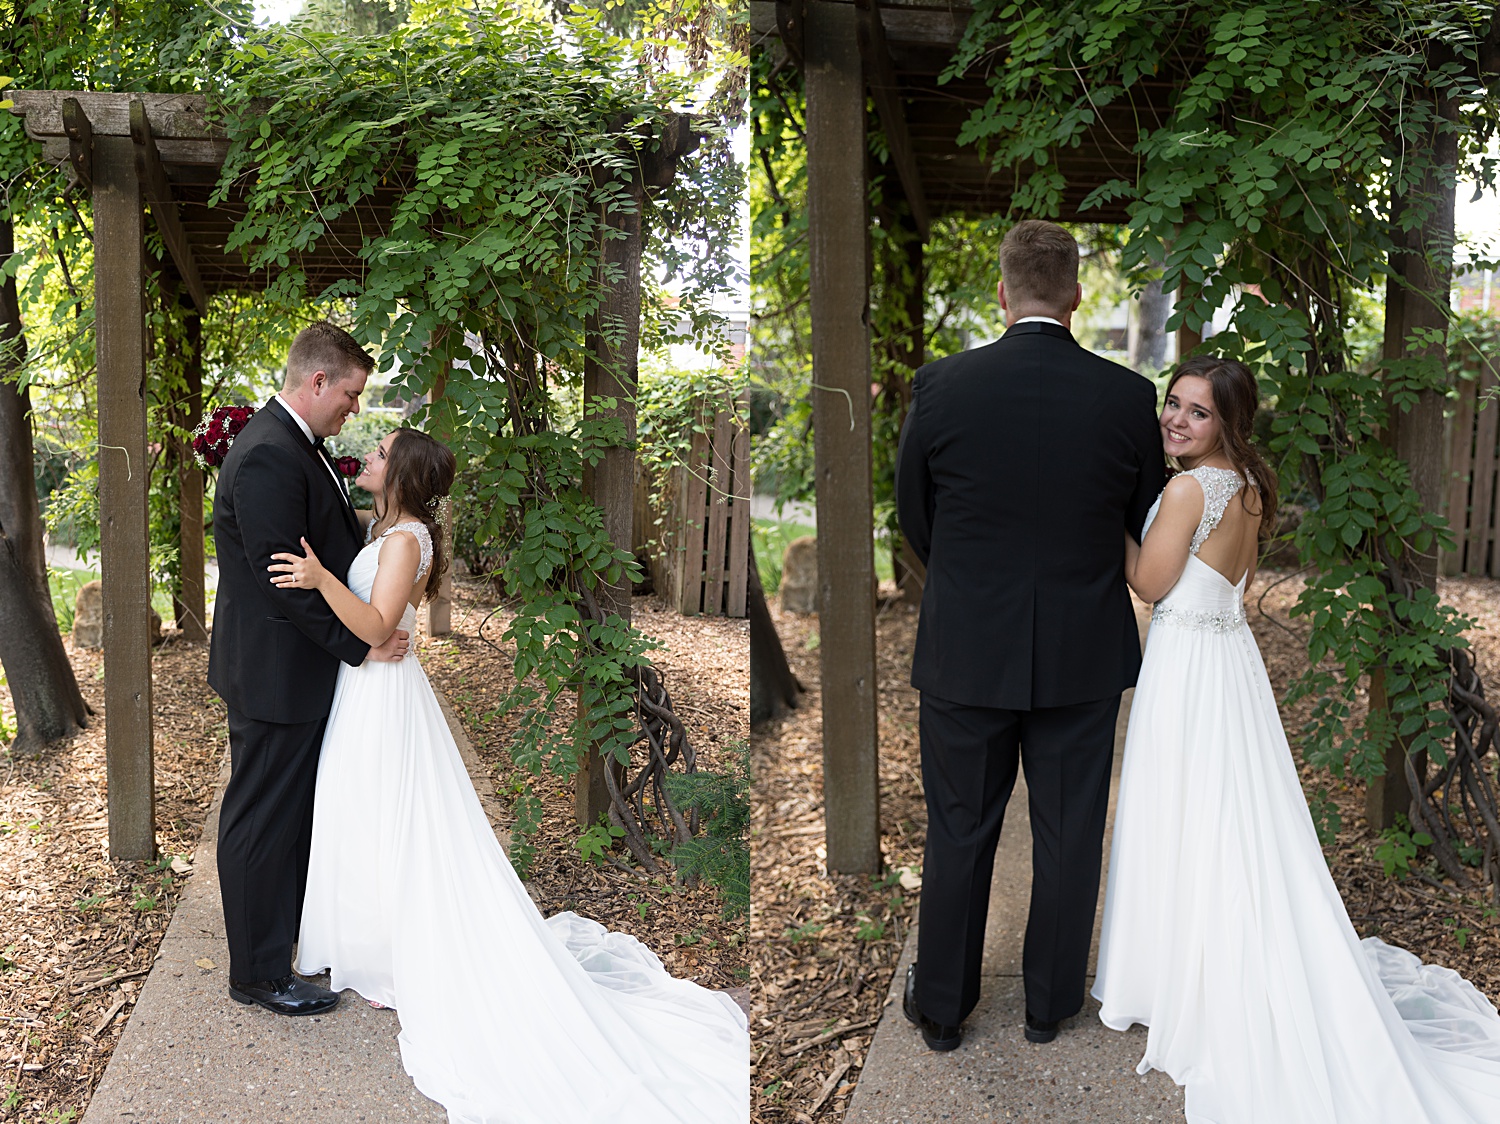 Wedding photos at the Japanese Garden in Lawrence, KS